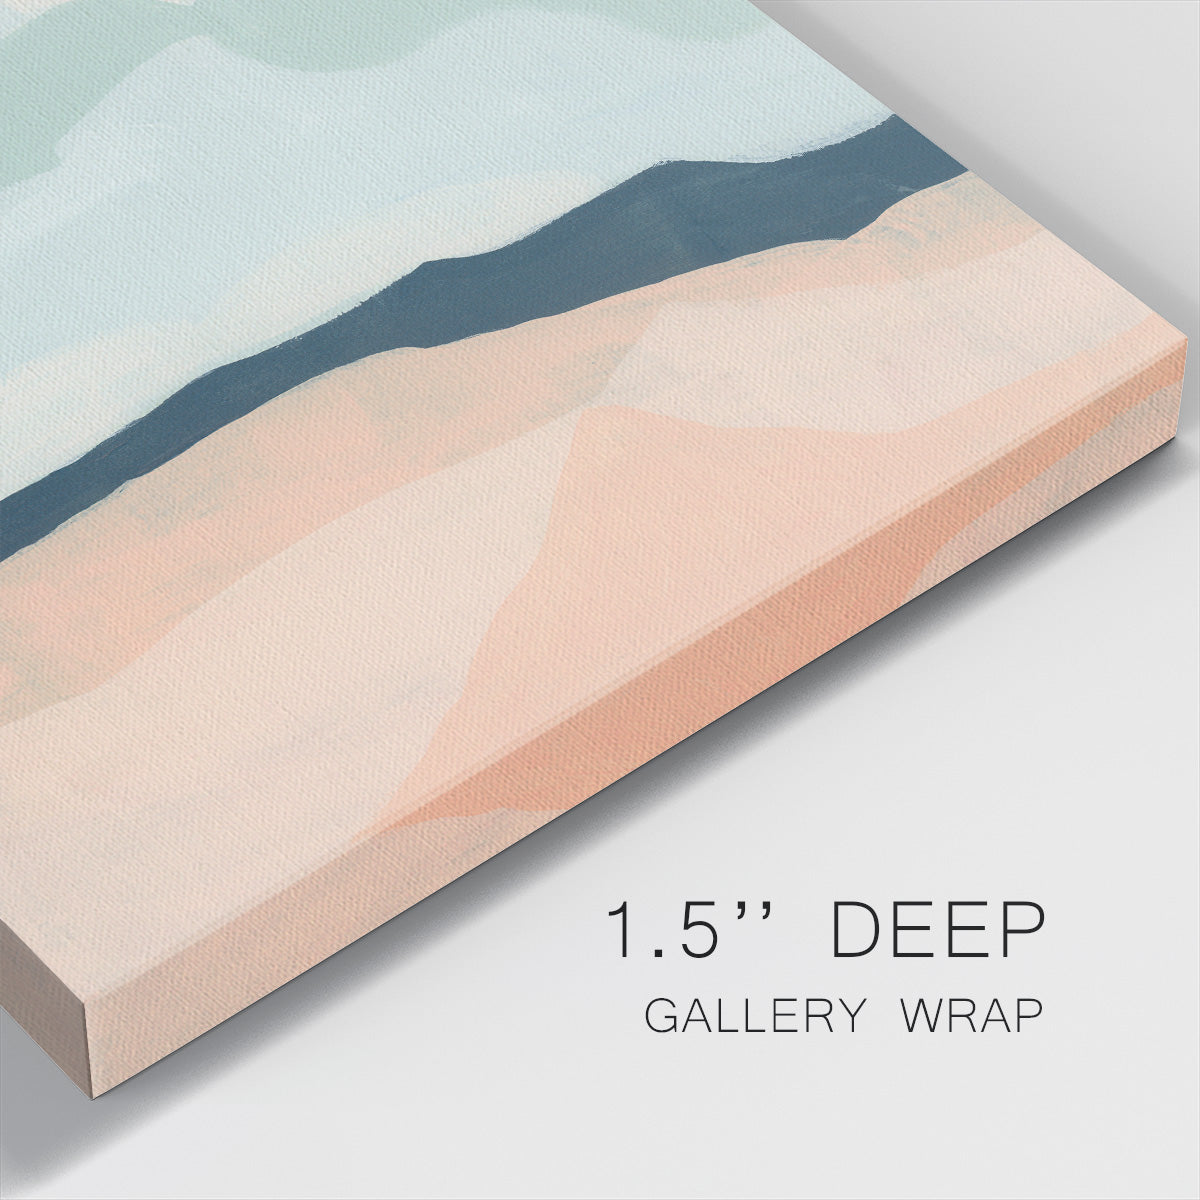 Simplescape III-Premium Gallery Wrapped Canvas - Ready to Hang